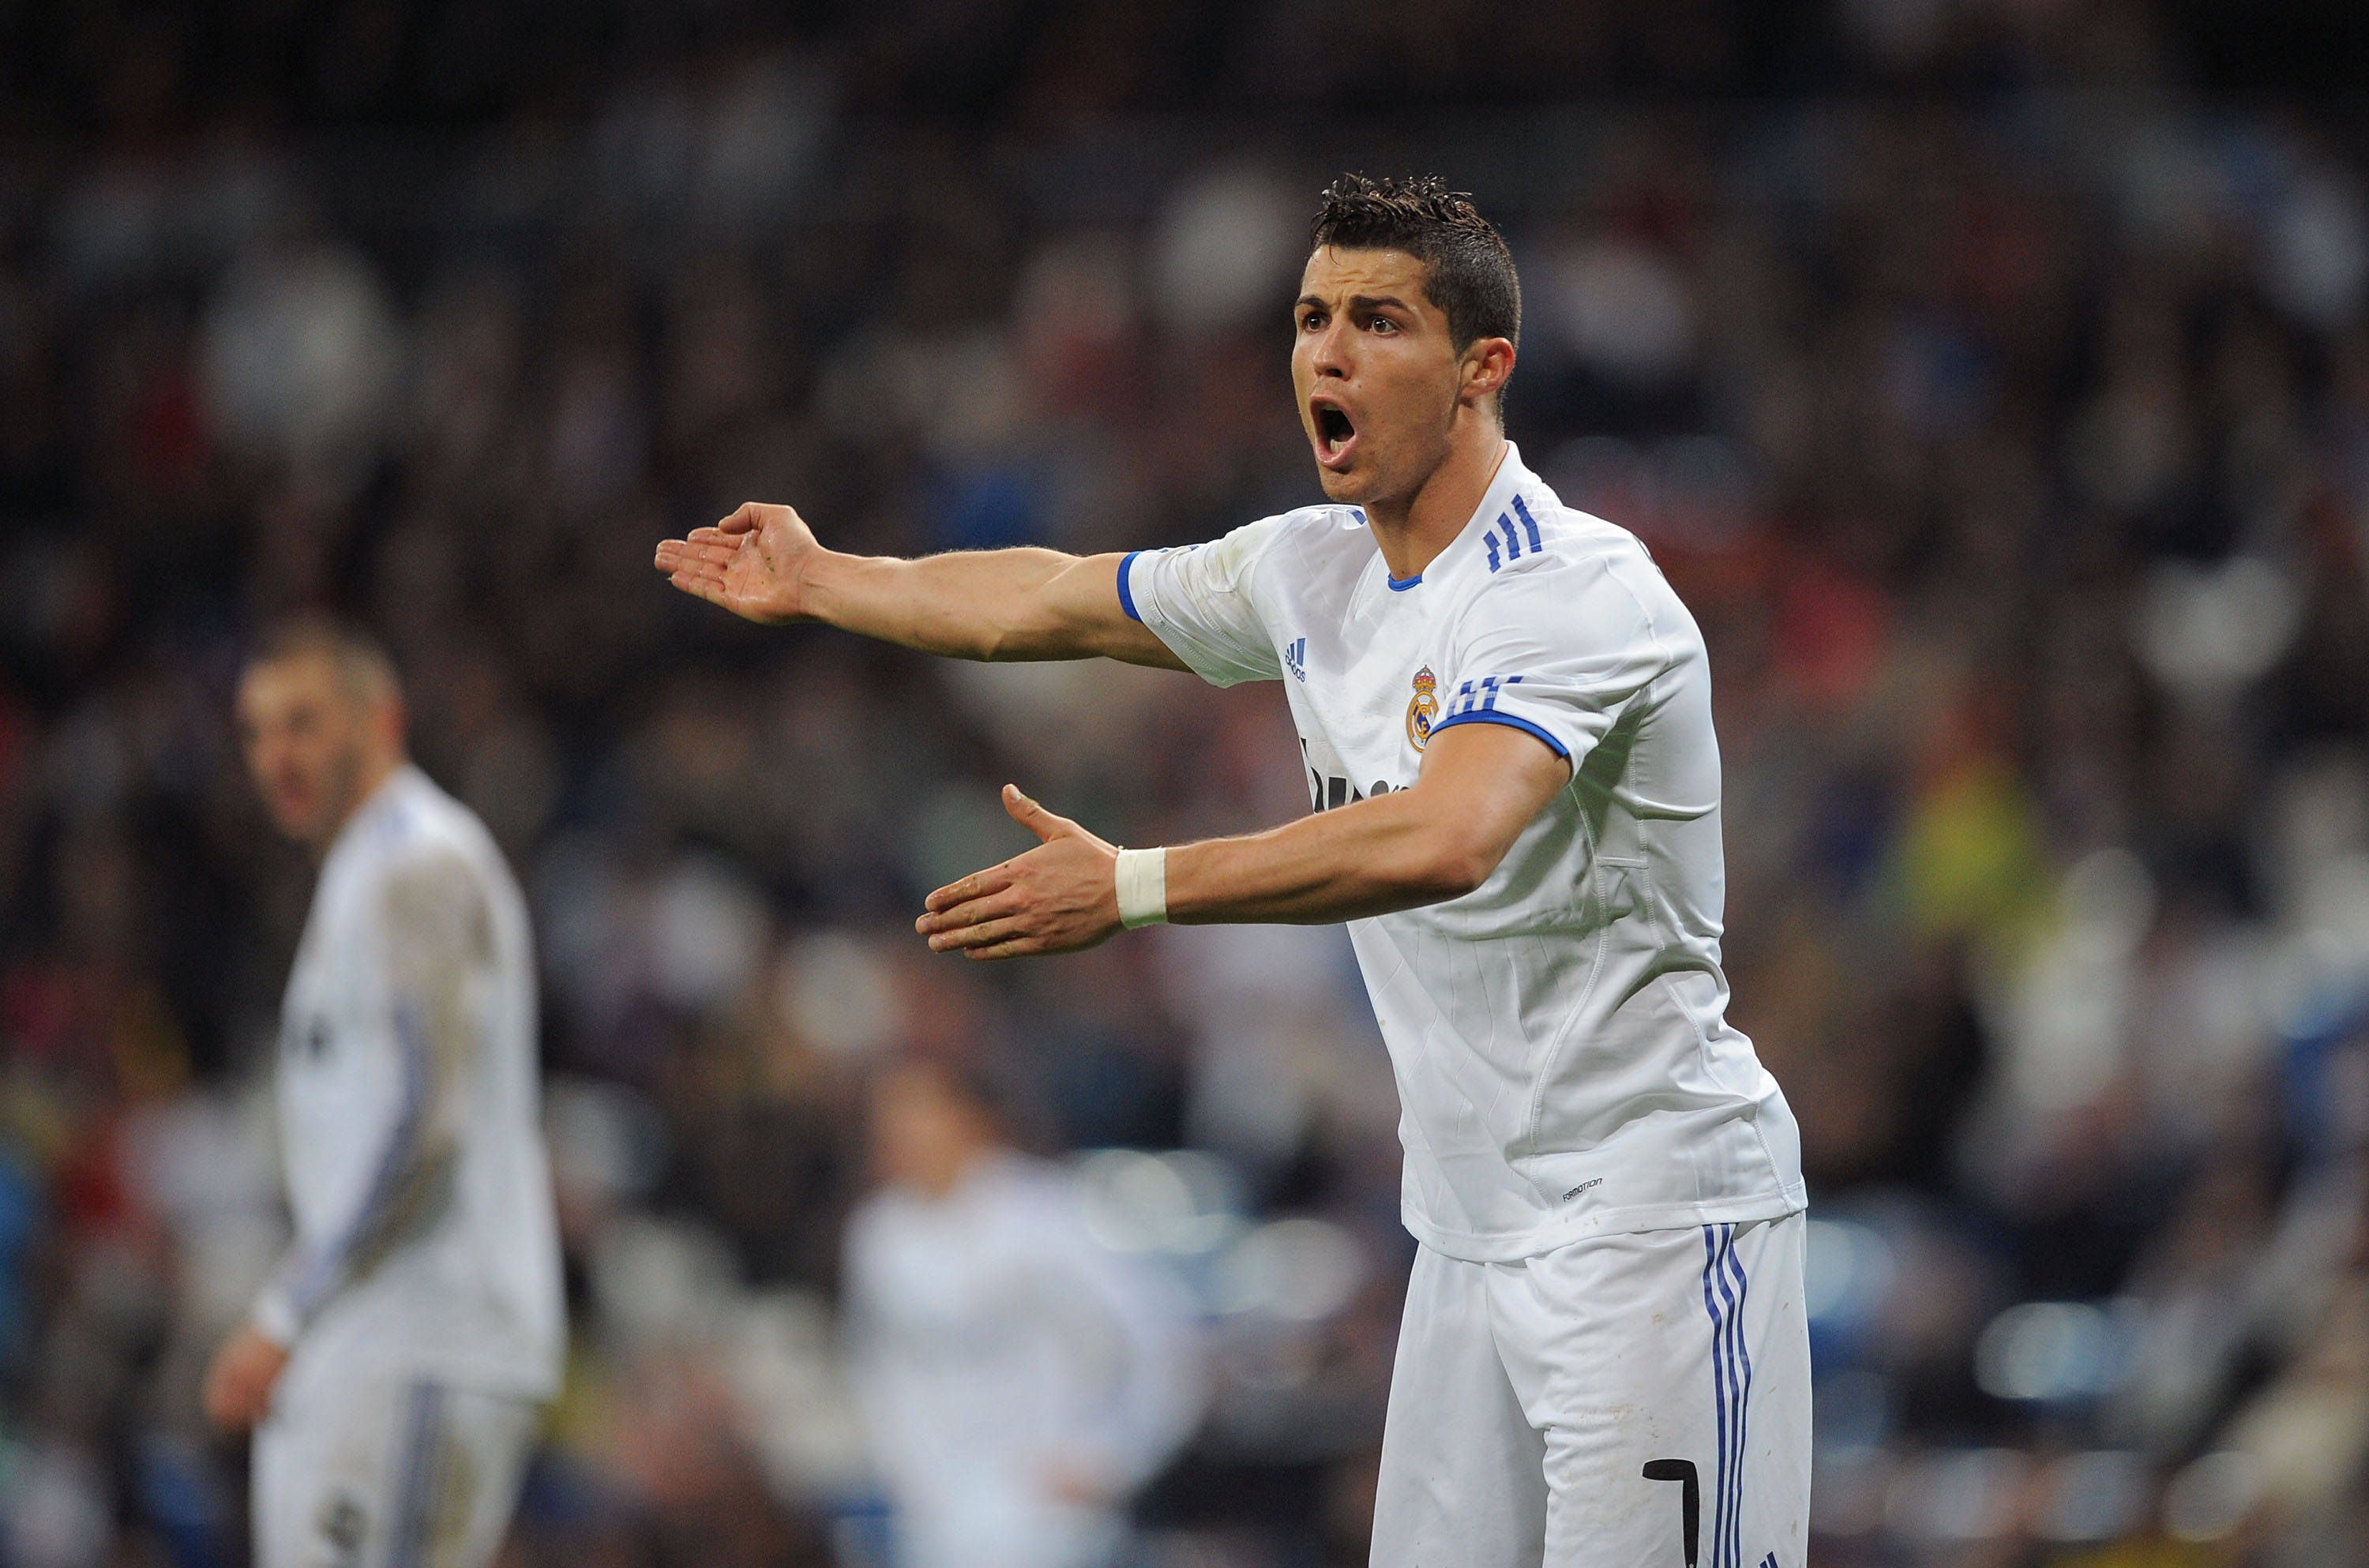 MADRID, SPAIN - DECEMBER 22:  Cristiano Ronaldo of Real Madrid reacts during the first leg round of 16 Copa del Rey match between Real Madrid and Levante at Estadio Santiago Bernabeu on December 22, 2010 in Madrid, Spain.  (Photo by Denis Doyle/Getty Imag